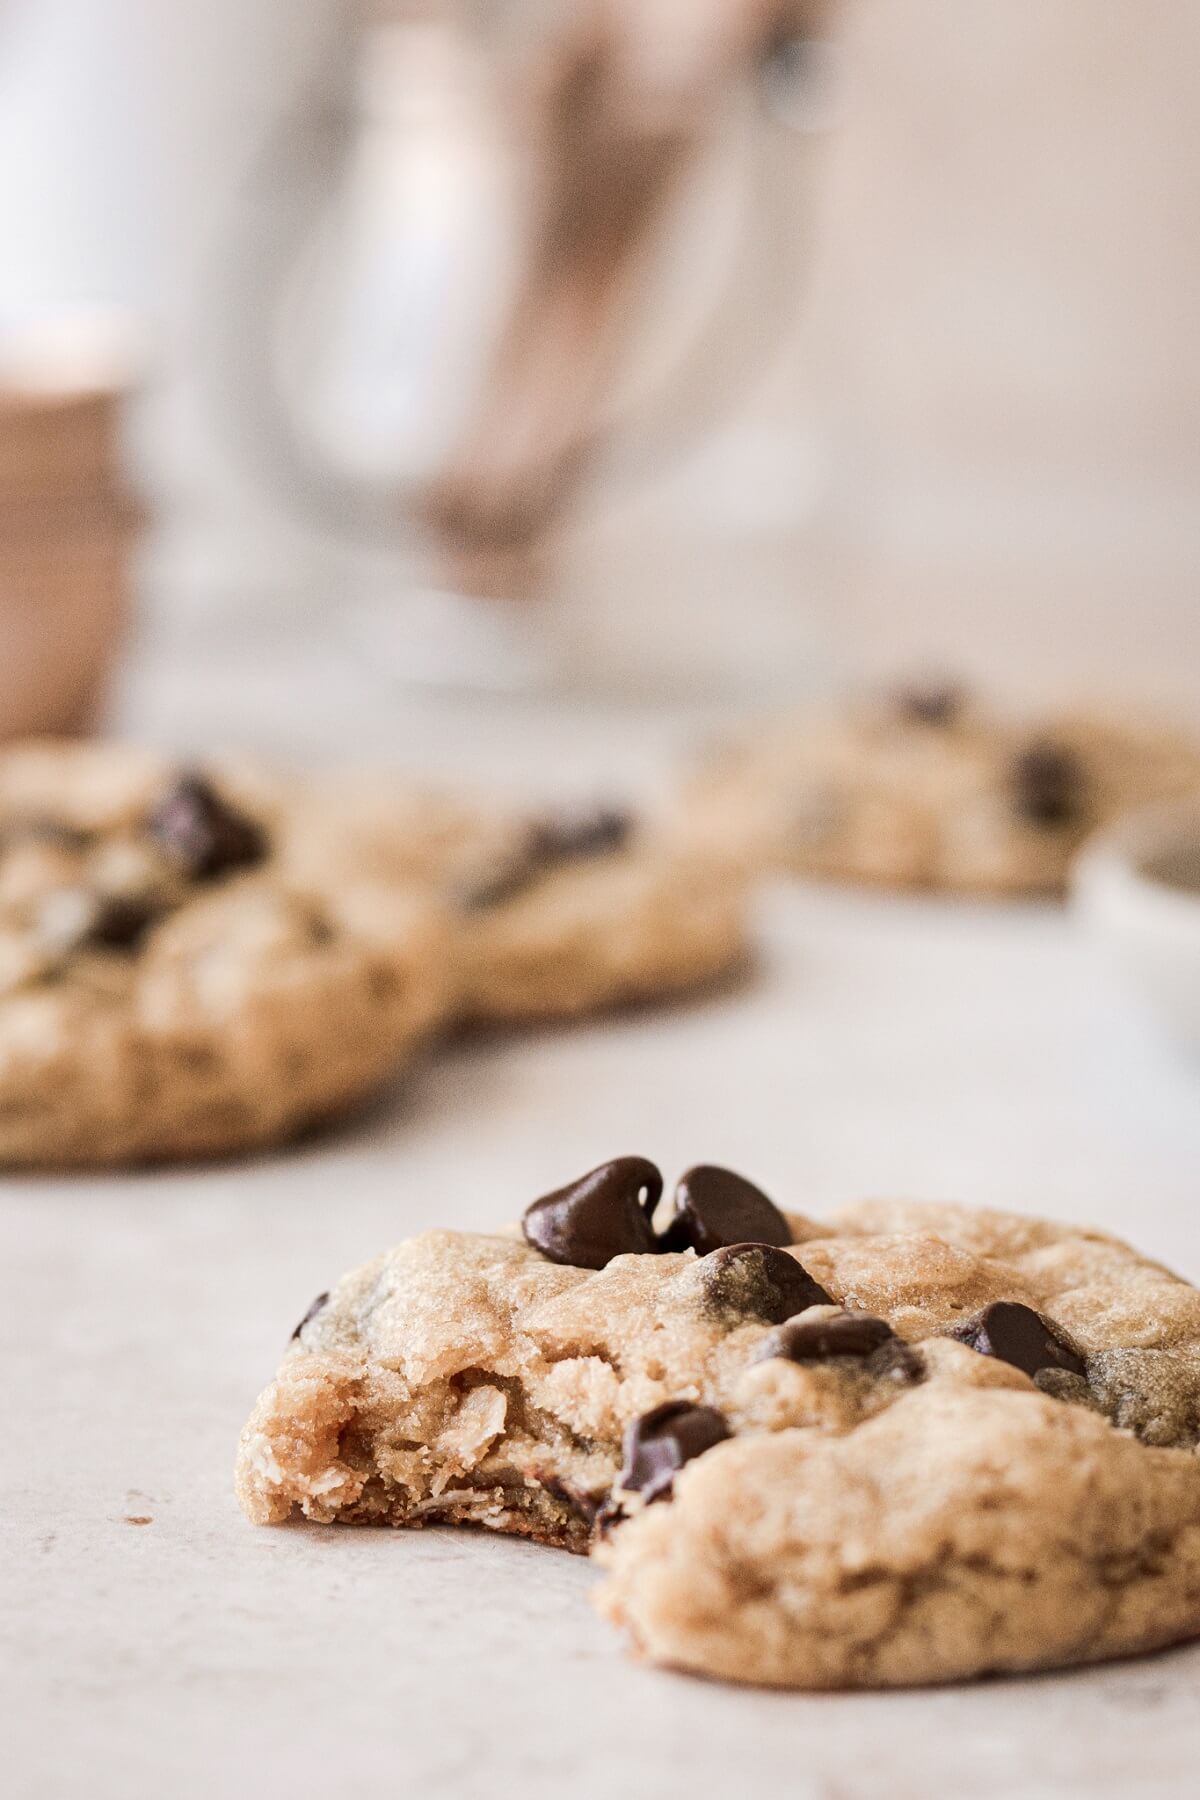 Oatmeal chocolate chip cookies with a bite taken.